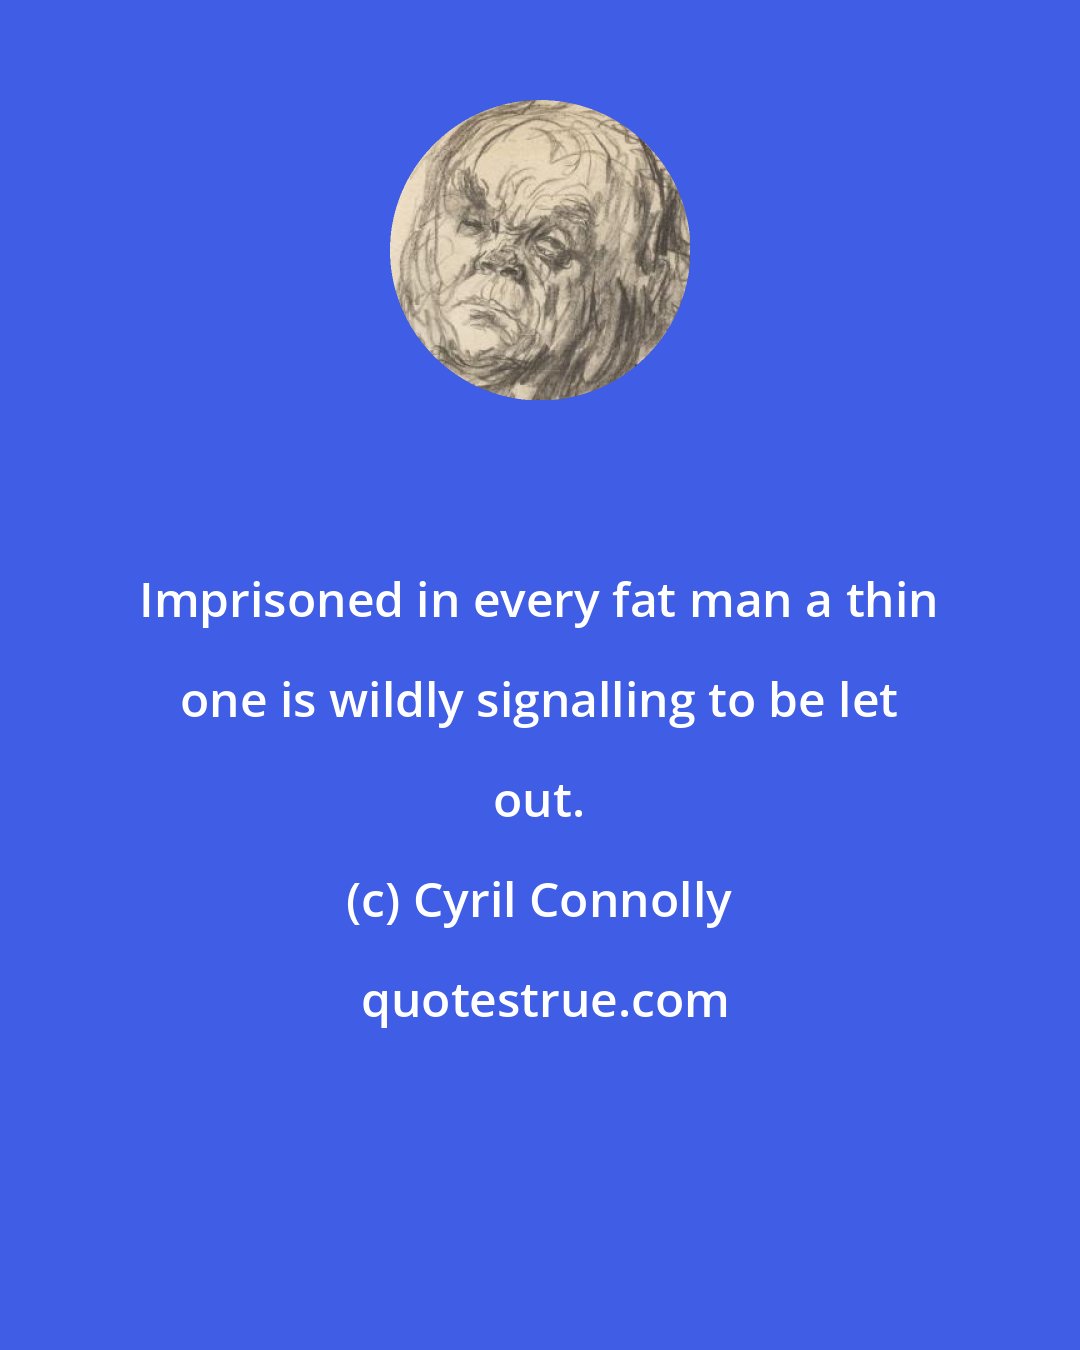 Cyril Connolly: Imprisoned in every fat man a thin one is wildly signalling to be let out.